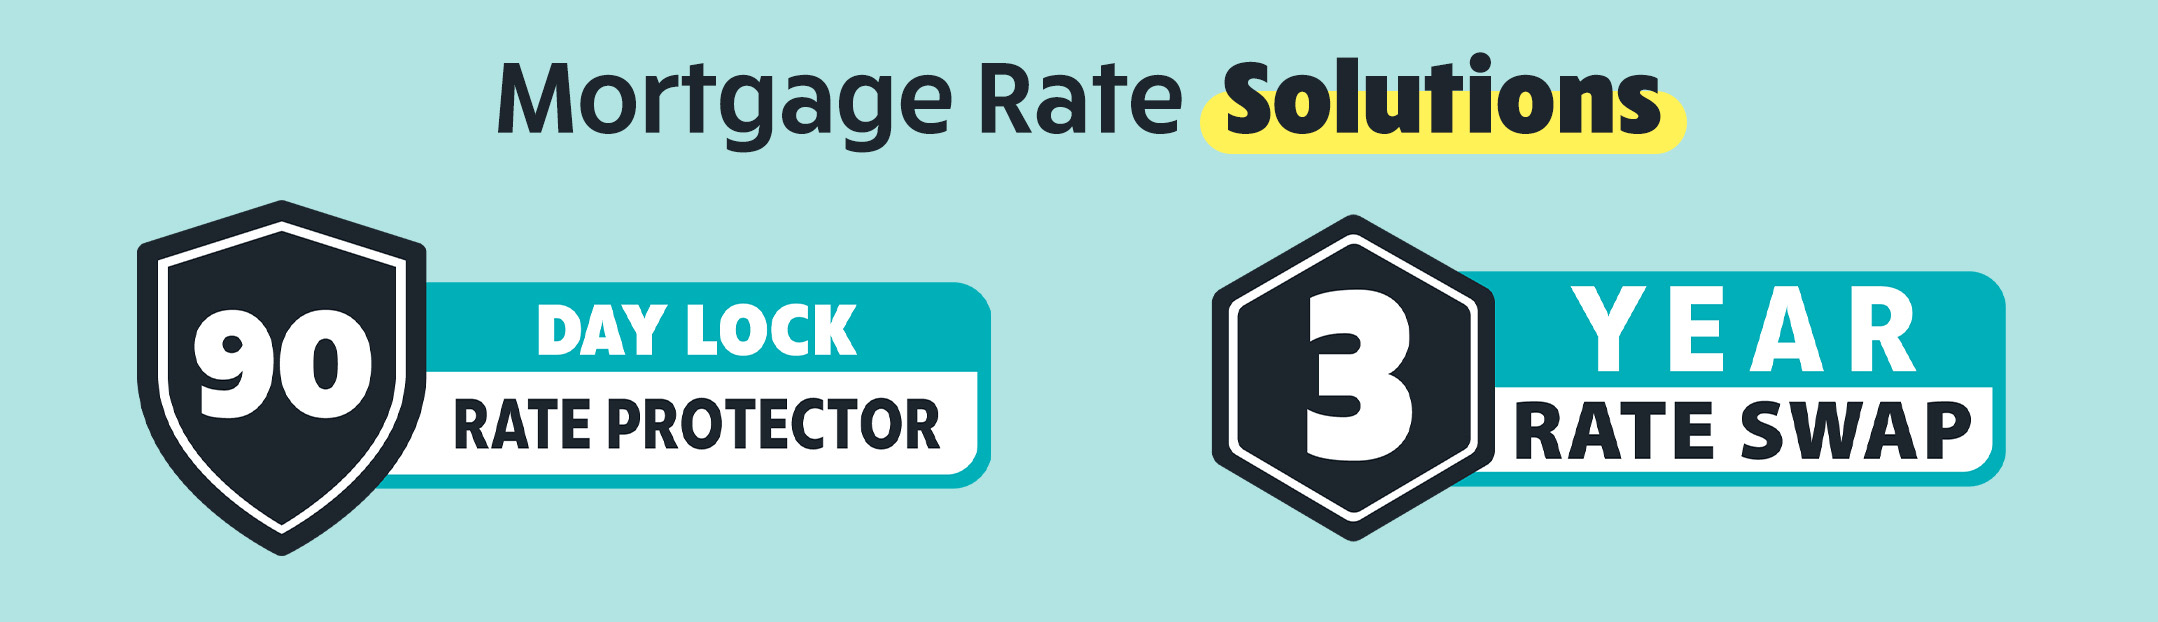 Mortgage Rate Solutions. 90 day lock rate protector. 3 year rate swap